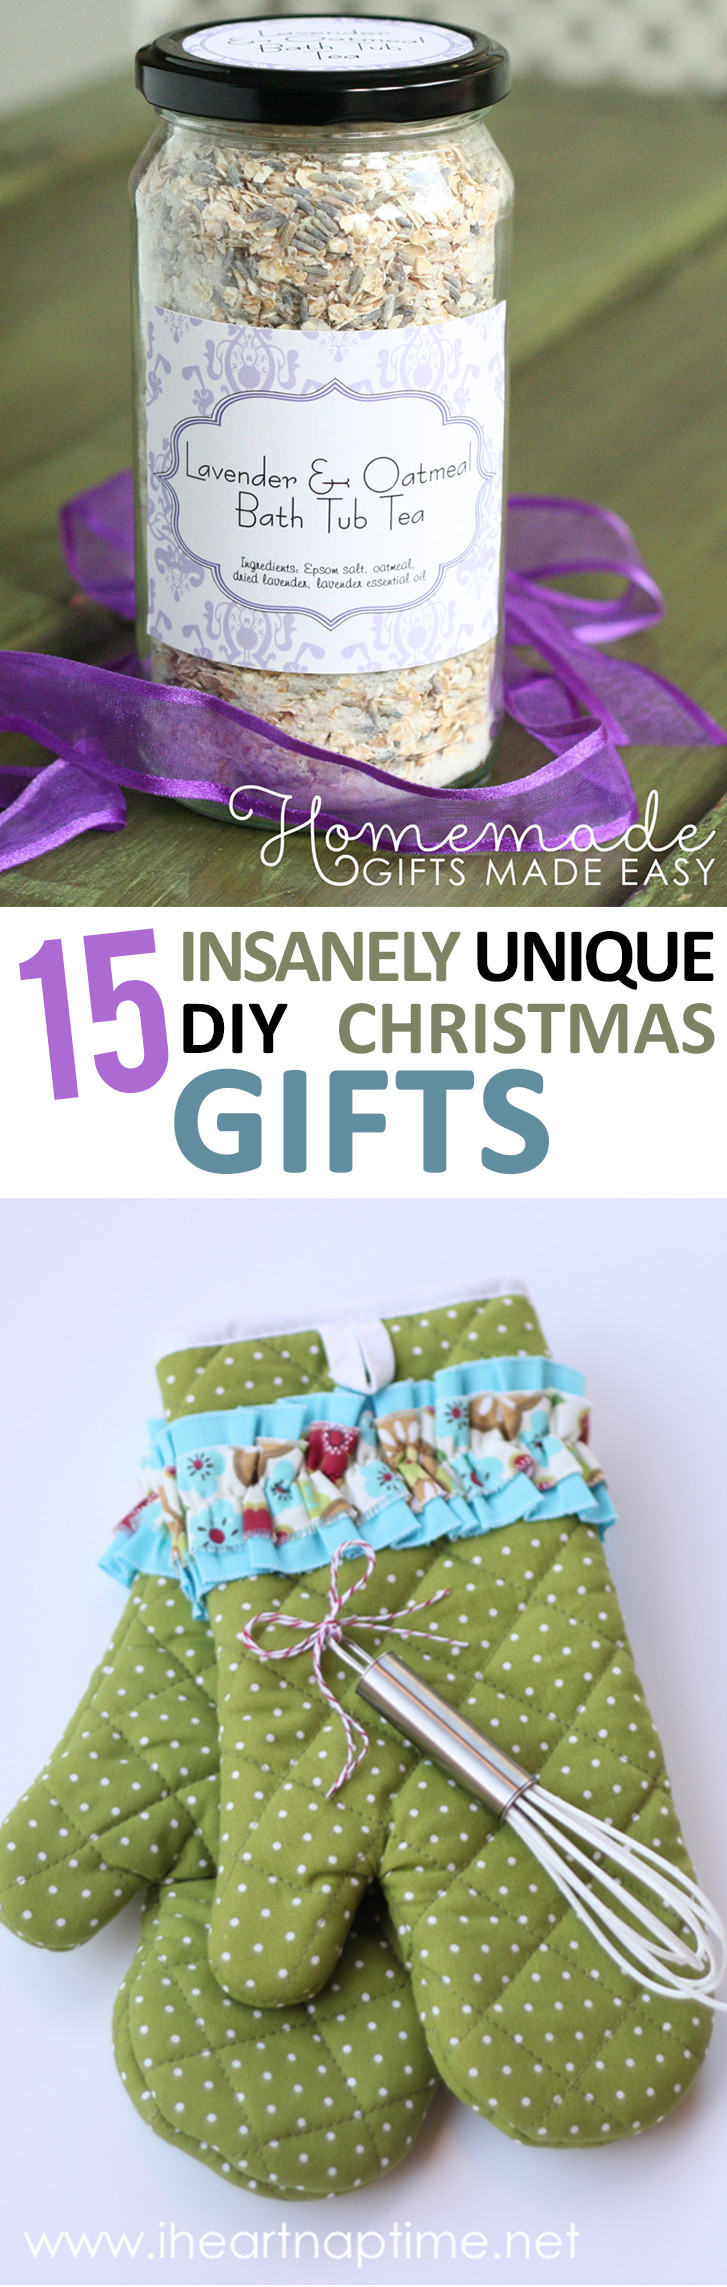 Unique DIY Christmas Gifts
 15 Insanely Unique DIY Christmas Gifts – Page 17 of 17